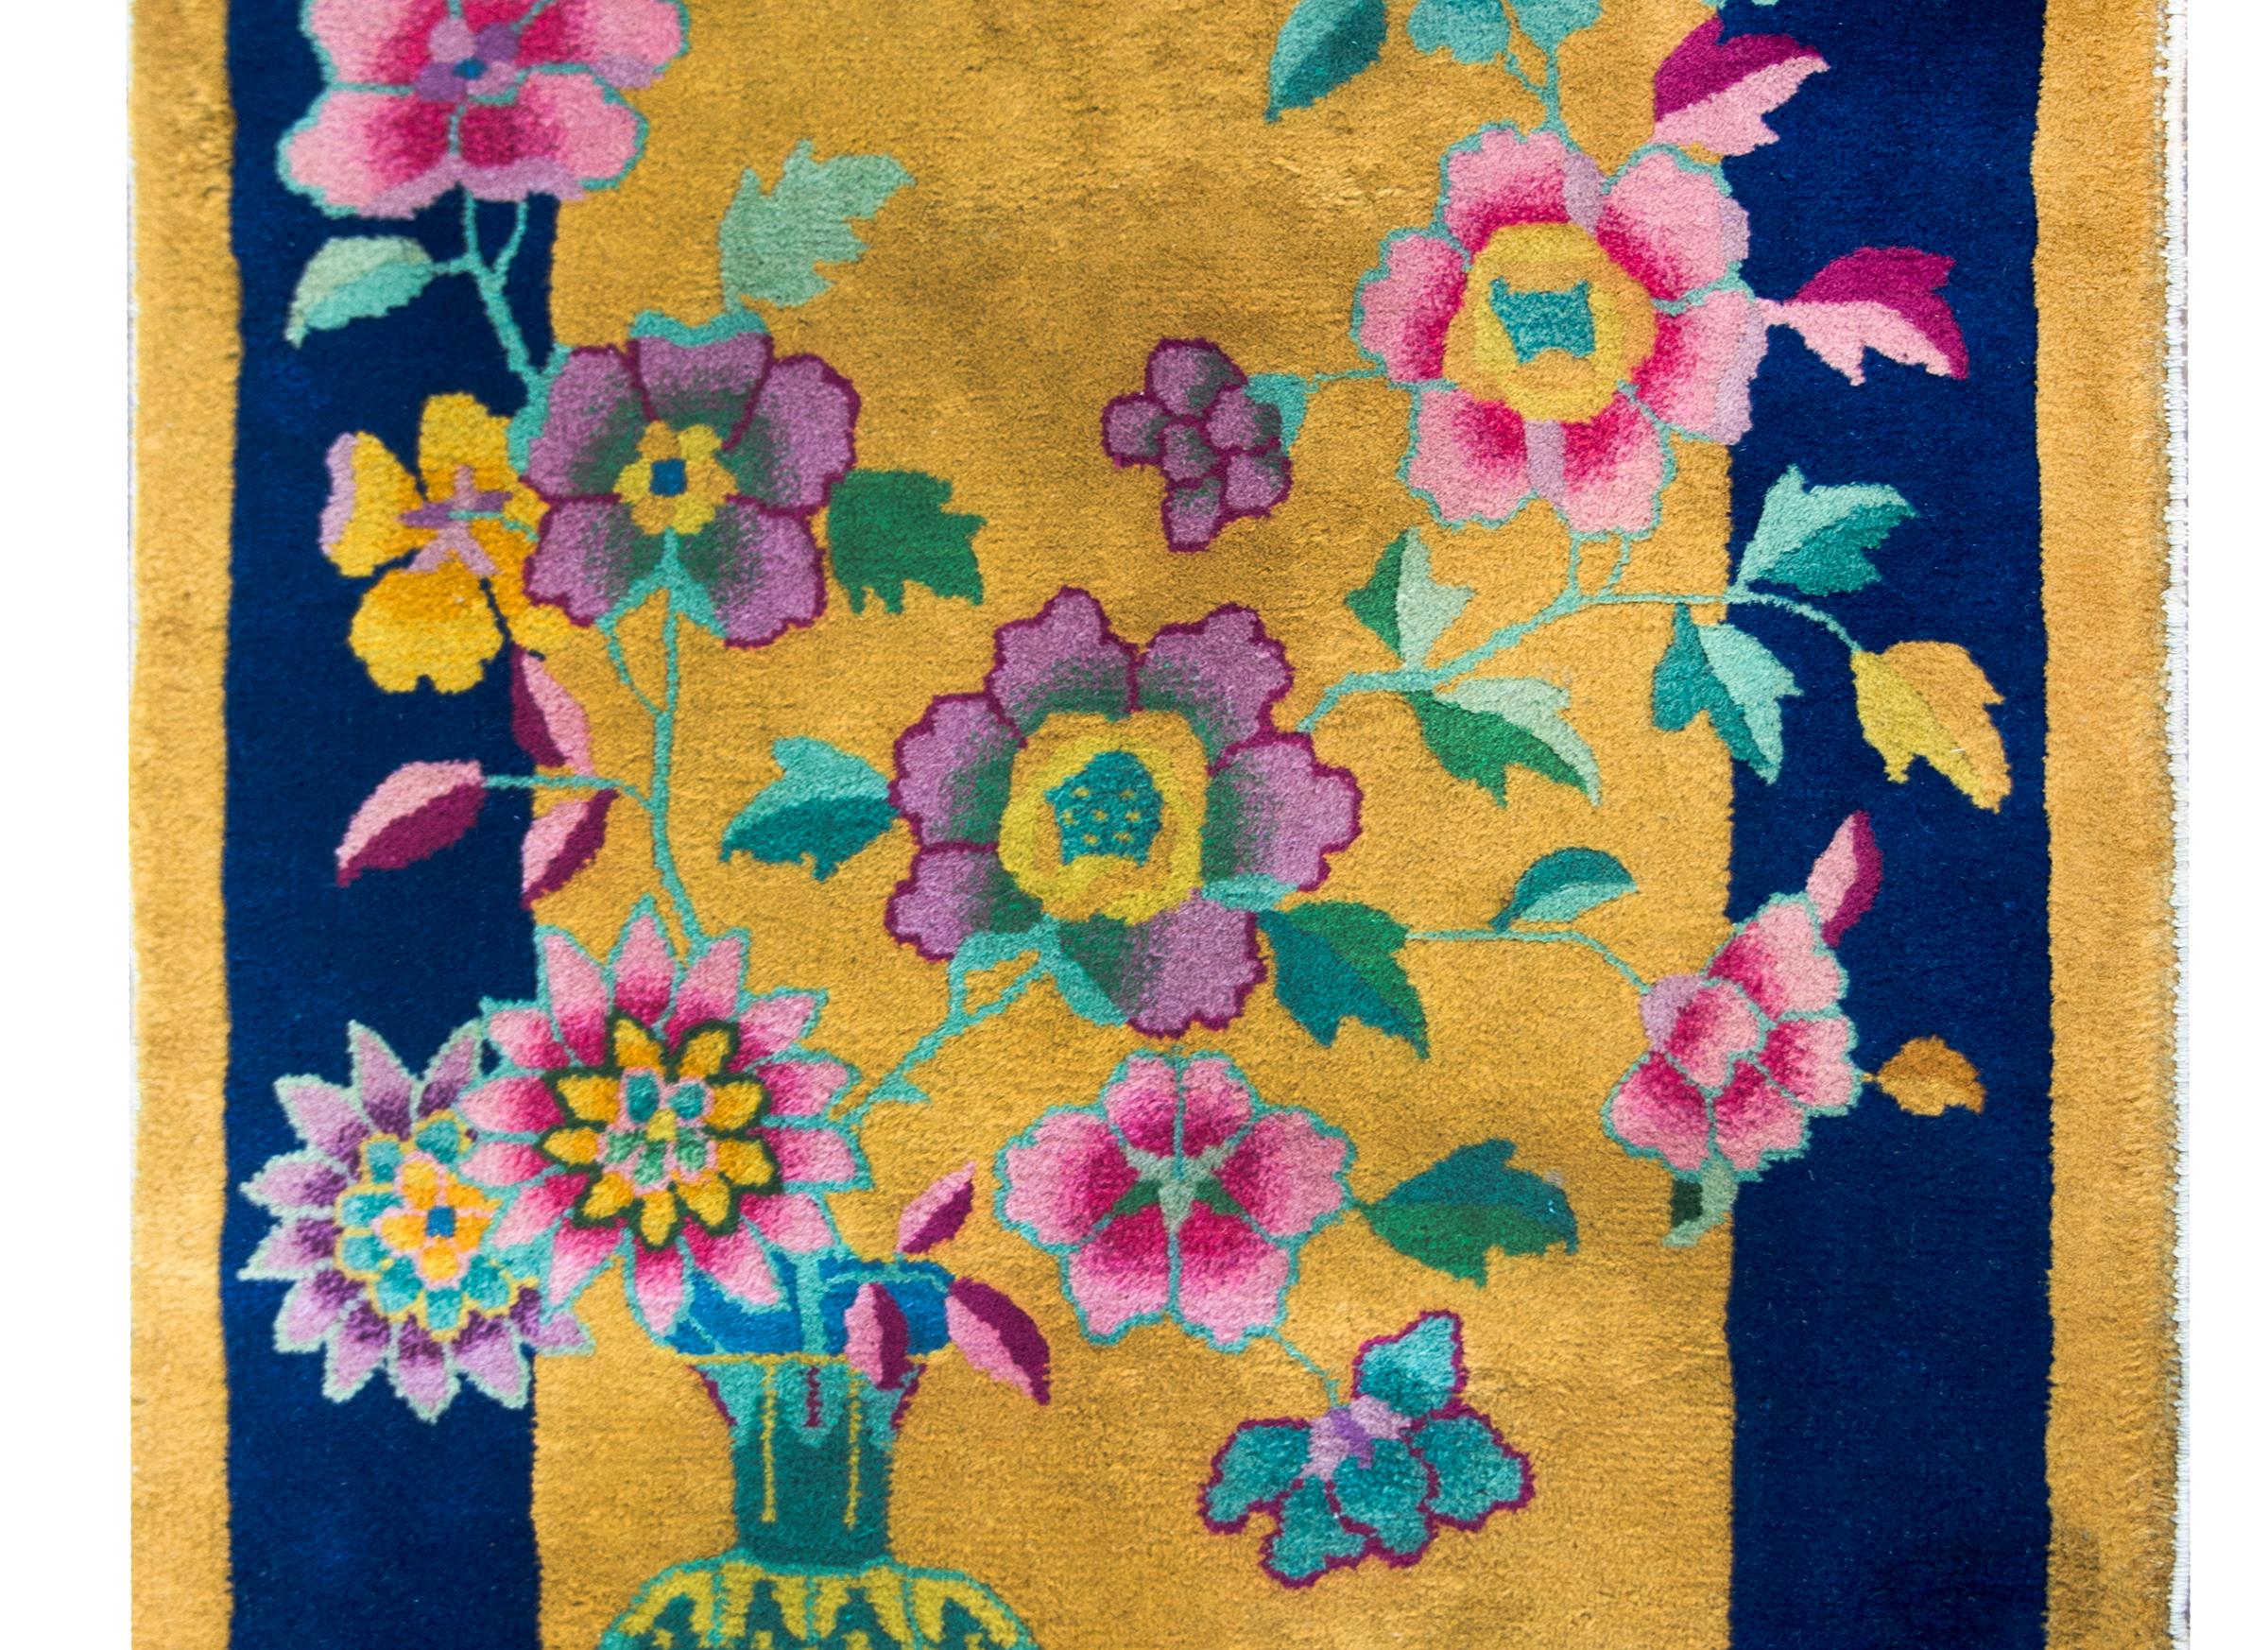 A sweet early 20th century Chinese Art Deco rug with a large vase in one corner, potted with multi-colored peonies, chrystanthemums, and cherry blossoms, and all set against a gold background with a wide indigo striped border.